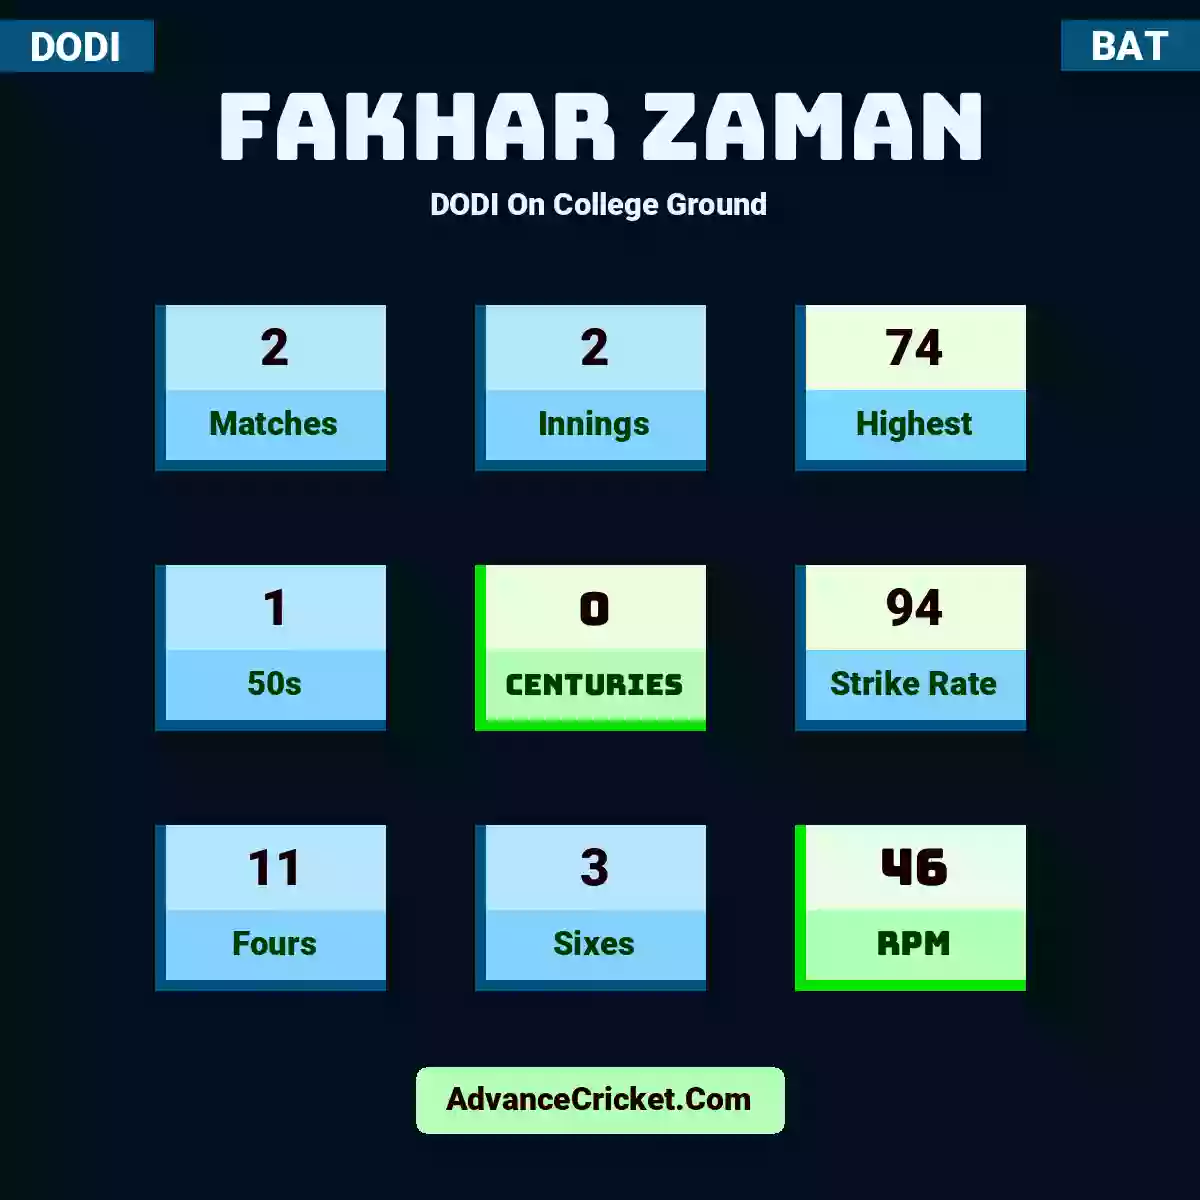 Fakhar Zaman DODI  On College Ground, Fakhar Zaman played 2 matches, scored 74 runs as highest, 1 half-centuries, and 0 centuries, with a strike rate of 94. F.Zaman hit 11 fours and 3 sixes, with an RPM of 46.